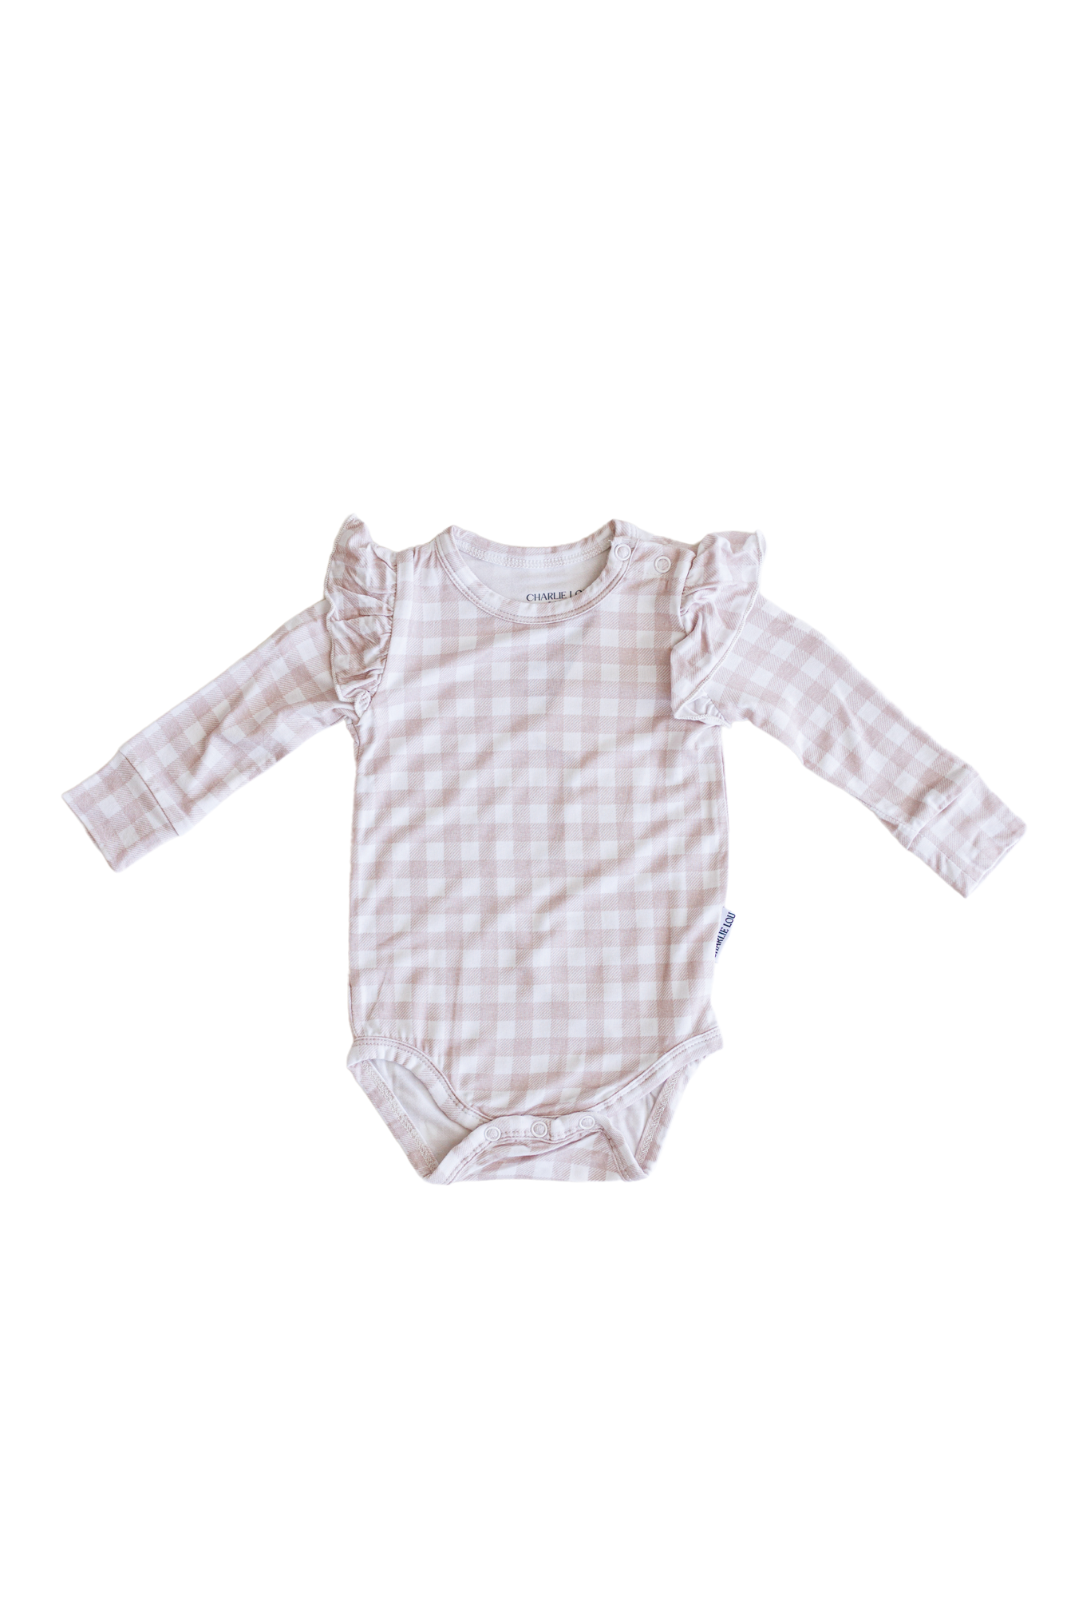 Ruffle bamboo bodysuit with crotch snaps and hand cuffs in peach and pink gingham.